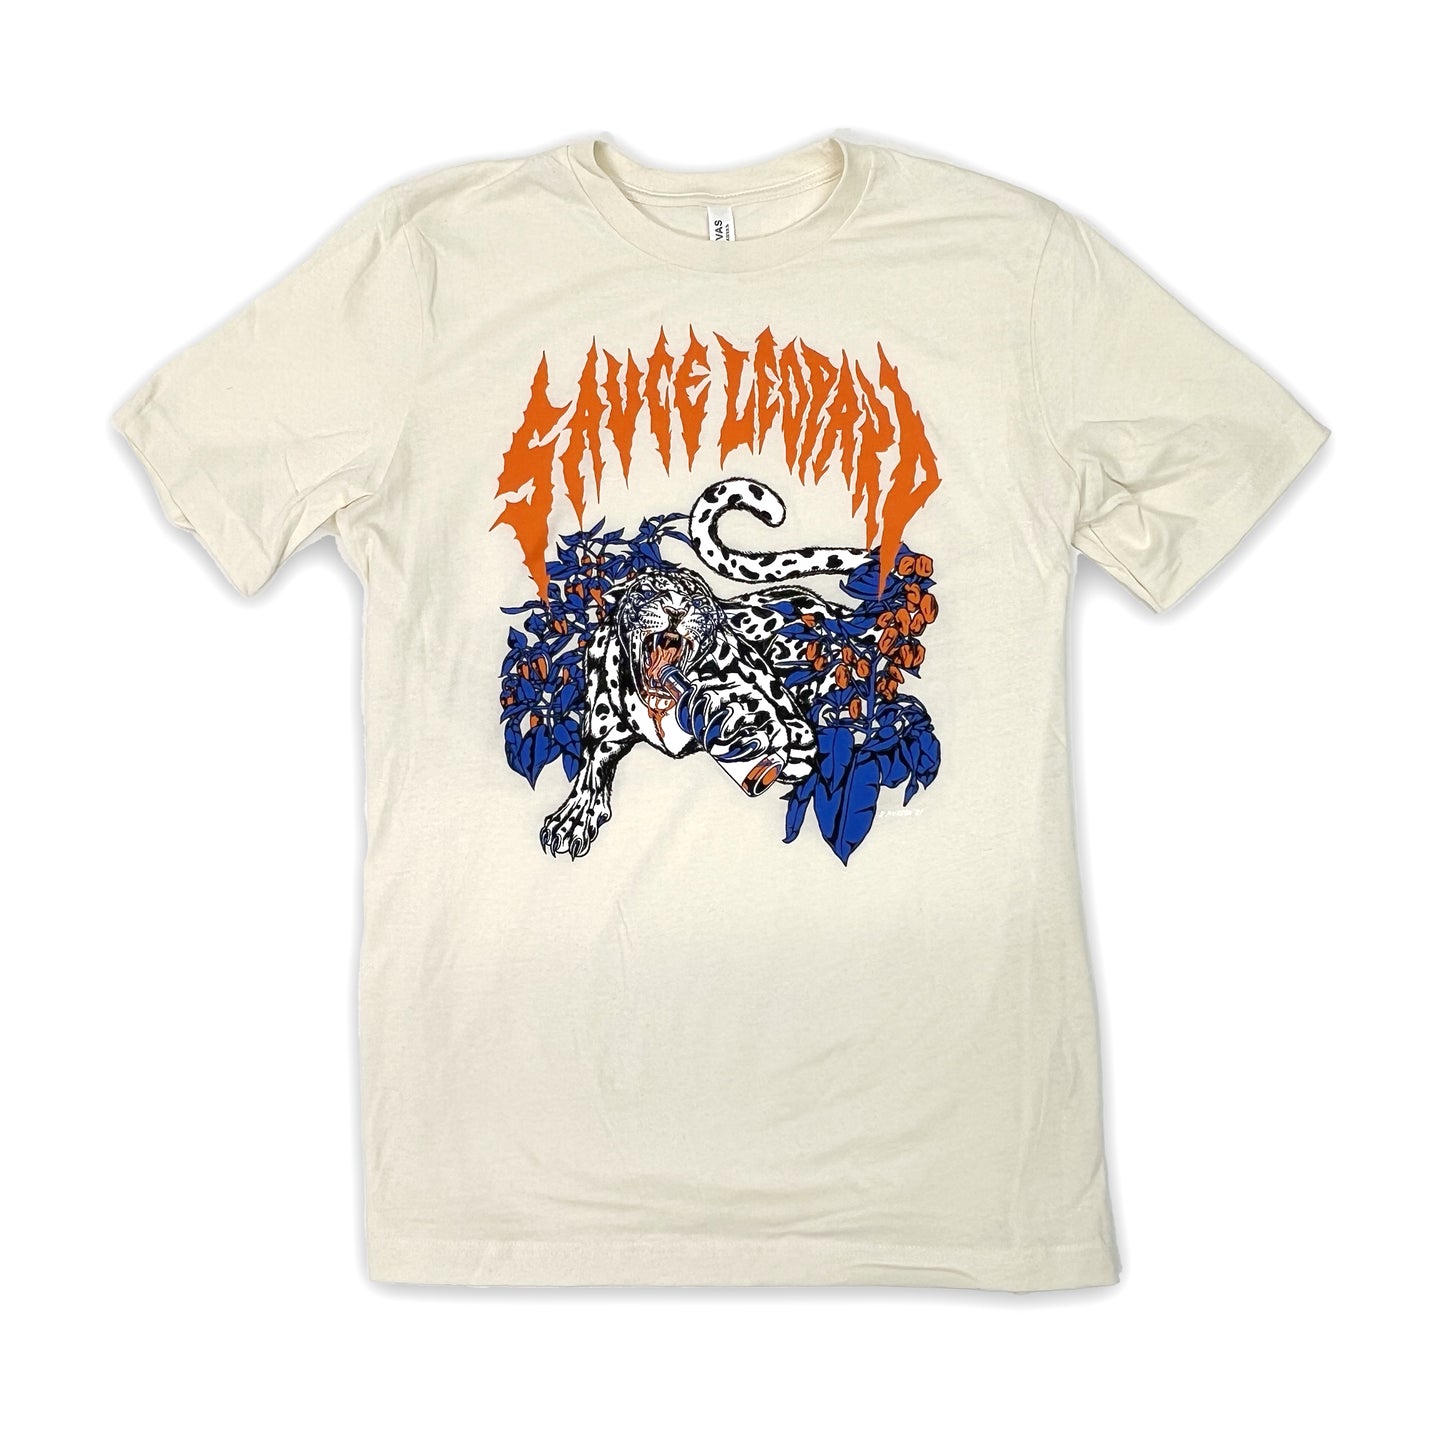 Sauced Cat Tee (NEW COLORWAY!)